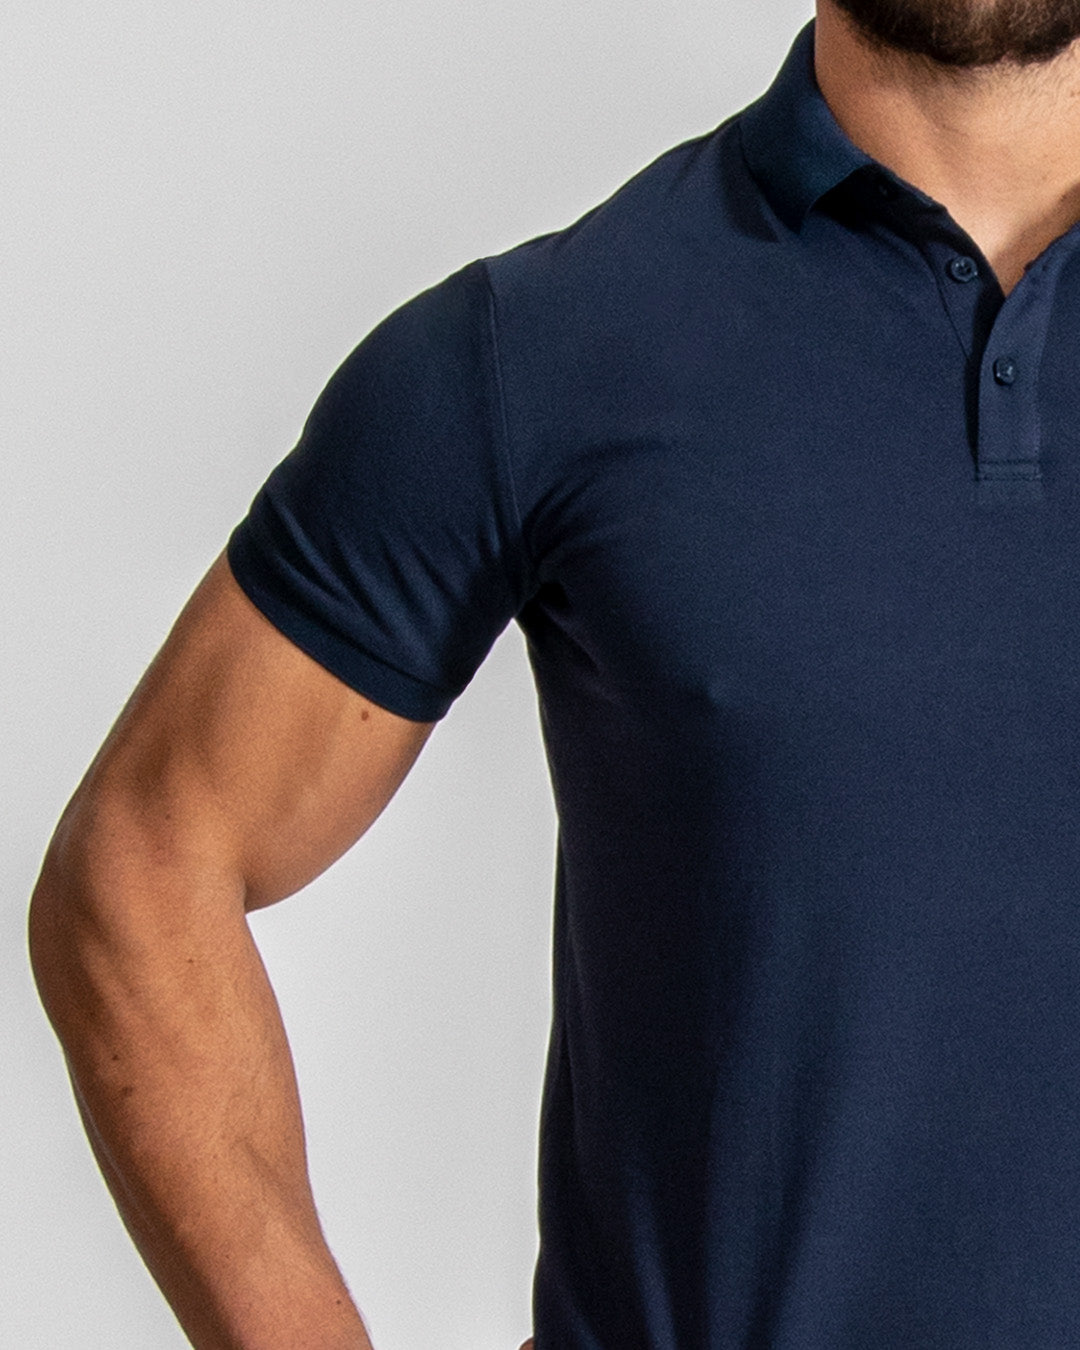 Men's Navy Muscle Fitted Pique Polo T-Shirt | Muscle Fit Basics